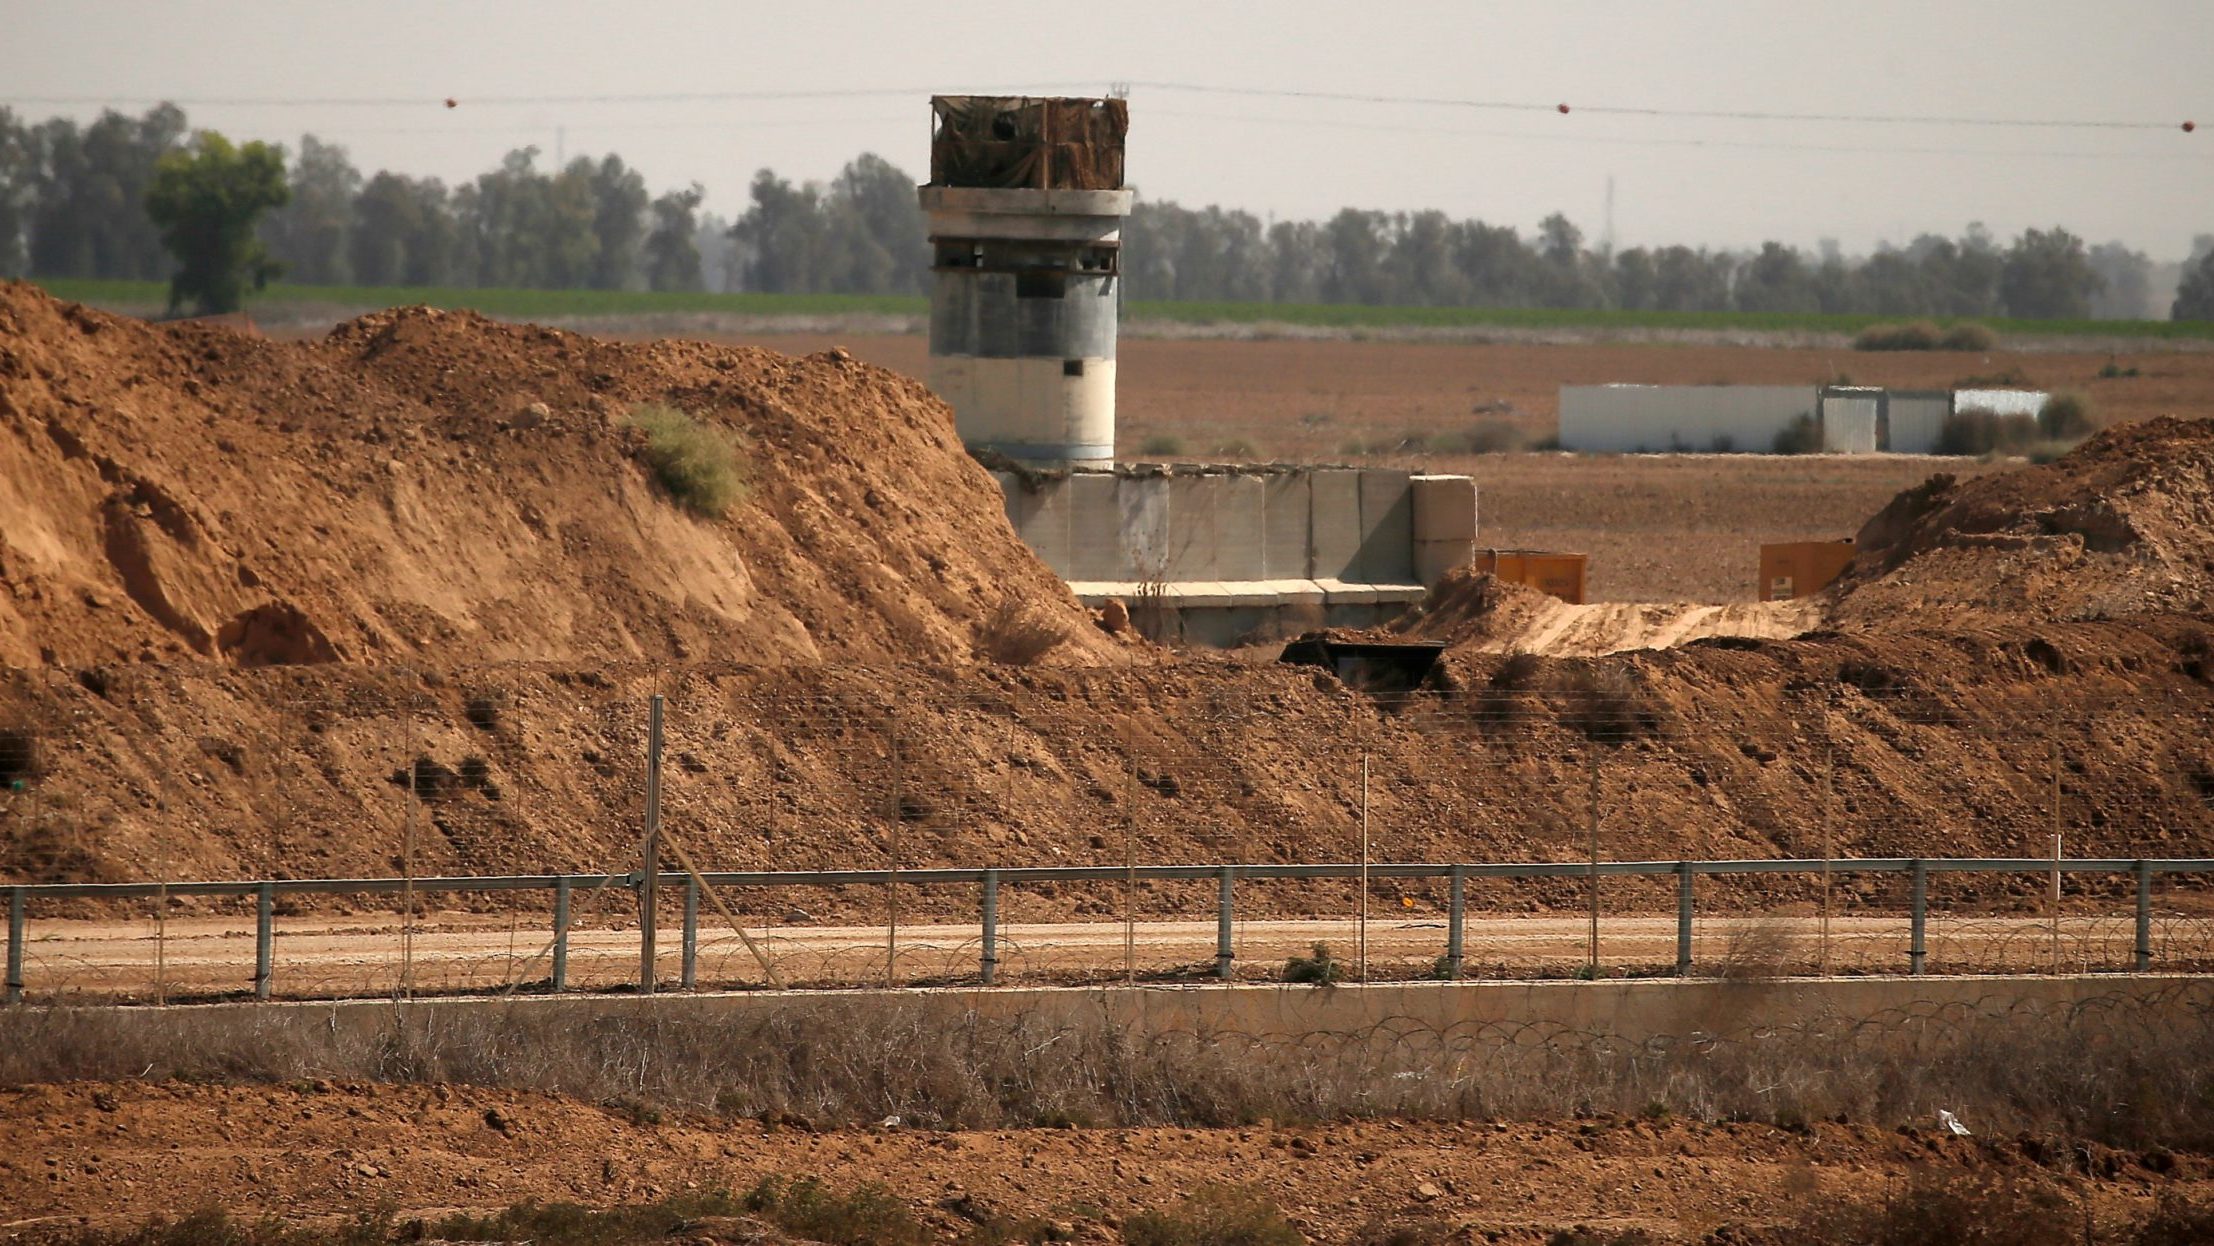 Israel: Hamas Behind Latest Tunnel from Gaza Strip - The Media Line